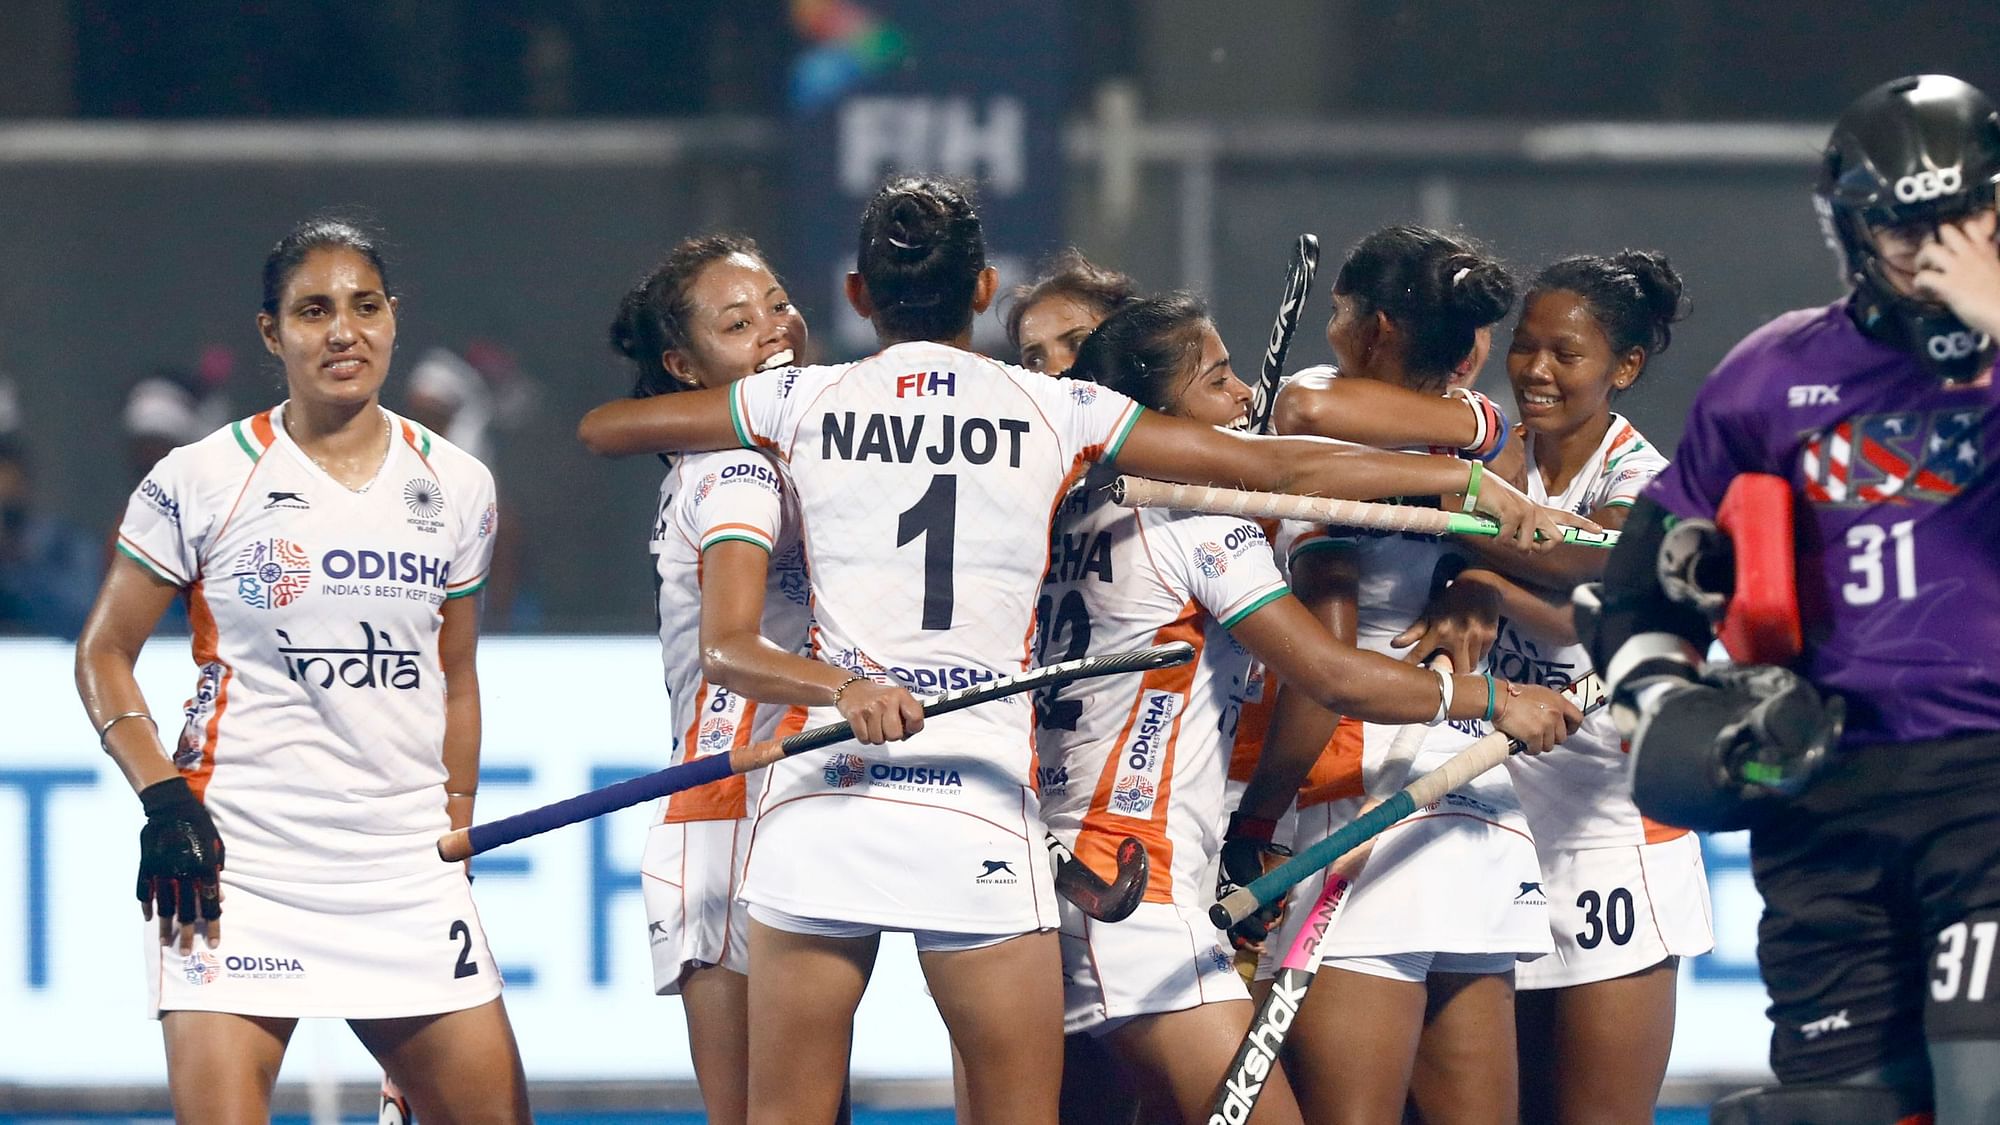 India’s women’s hockey team beat USA in the first leg of their Olympic qualifiers.